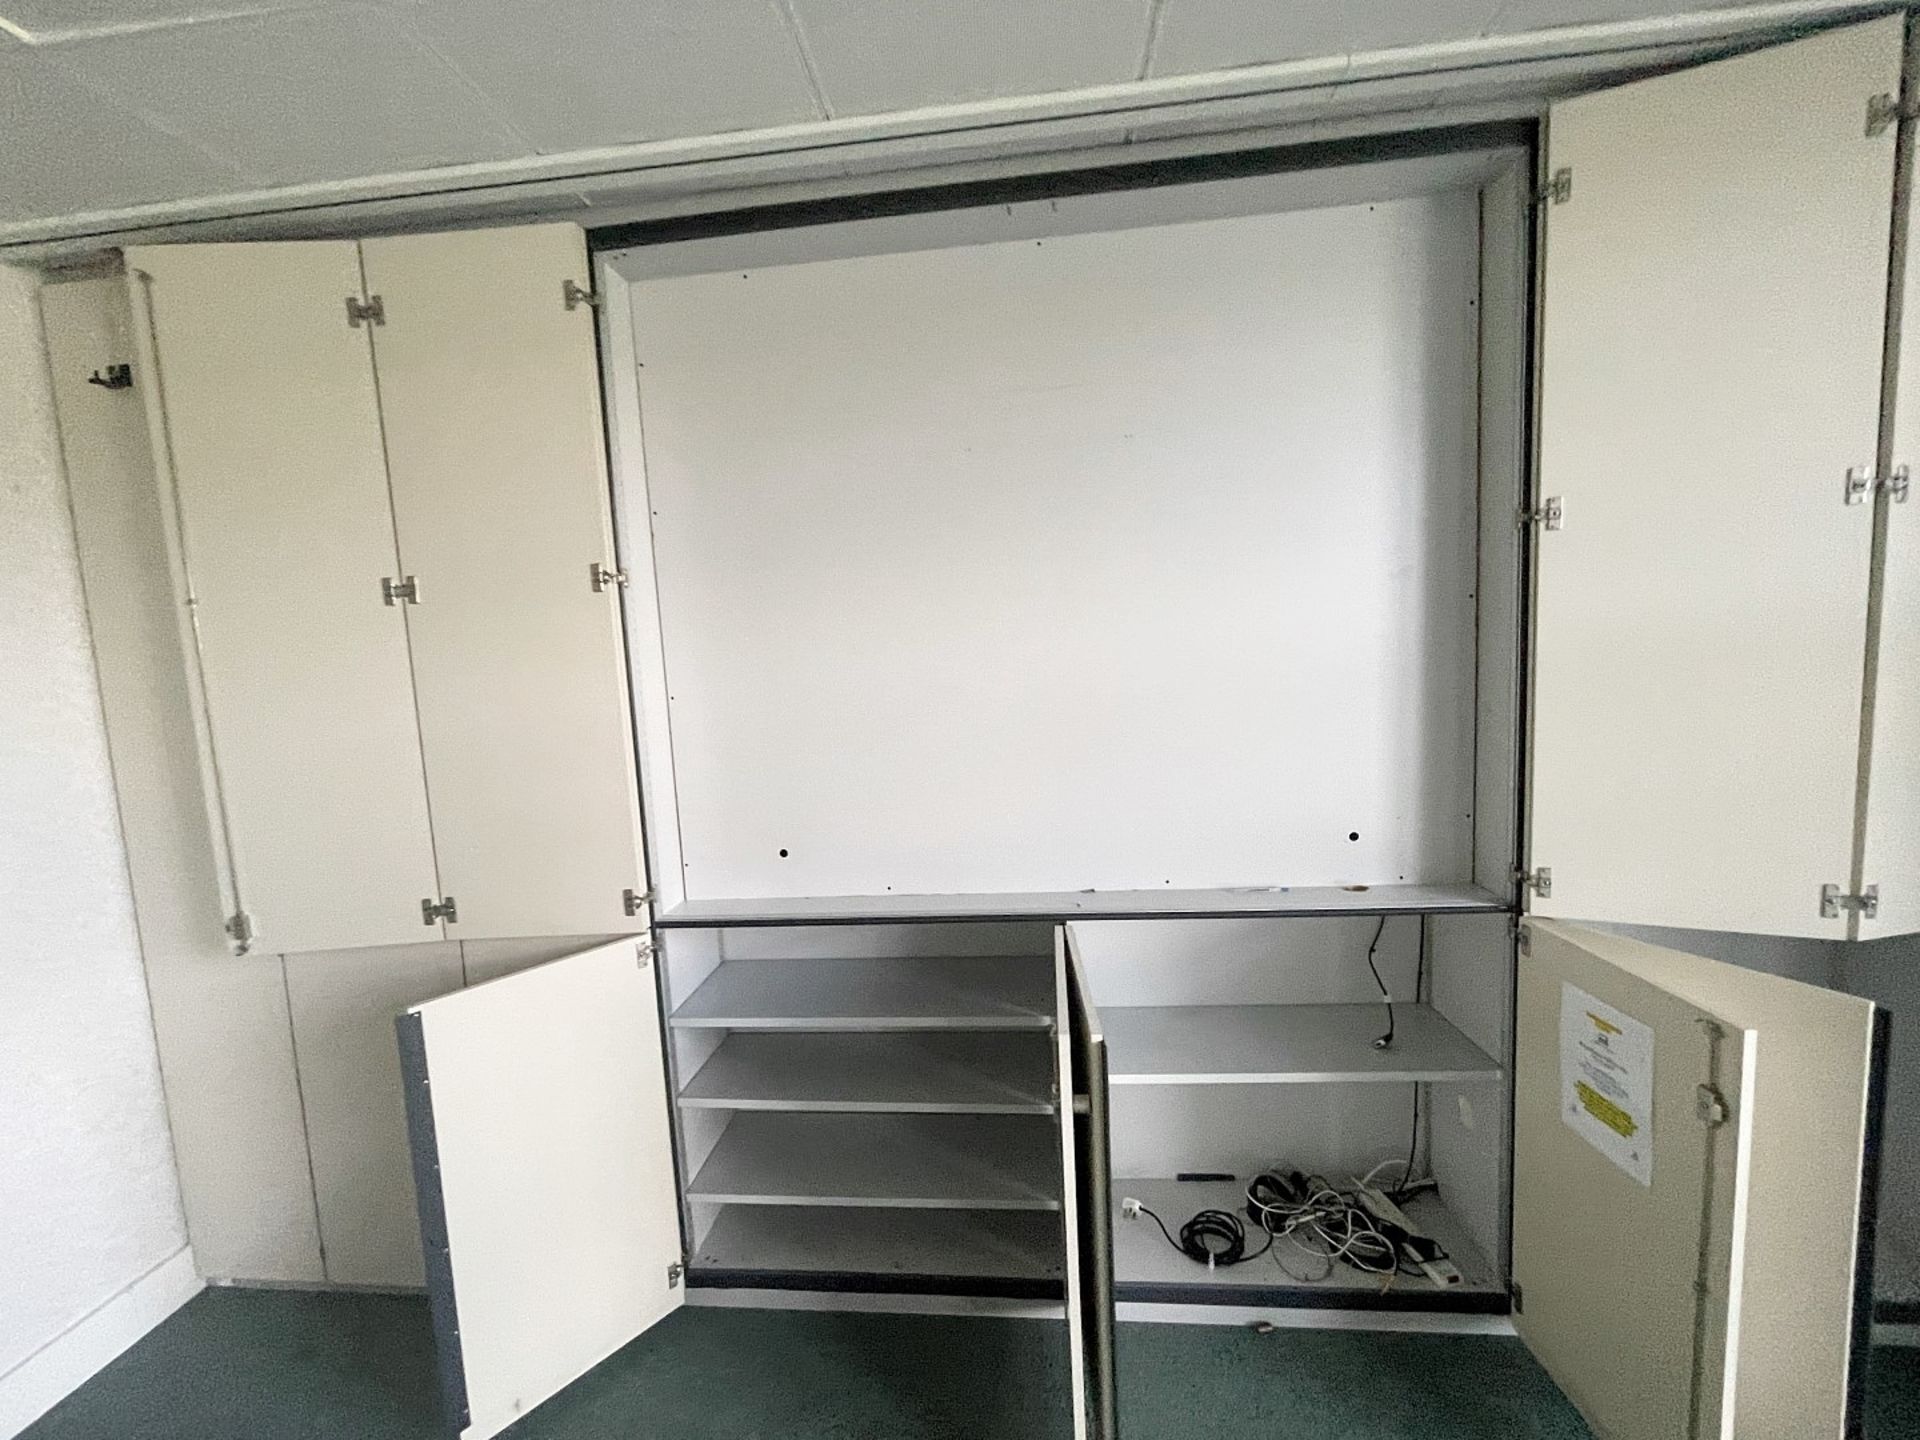 4.8 Metre Wide Bank Of Wall Storage Units - Ref: ED167C - To Be Removed From An Executive Office - Image 3 of 5